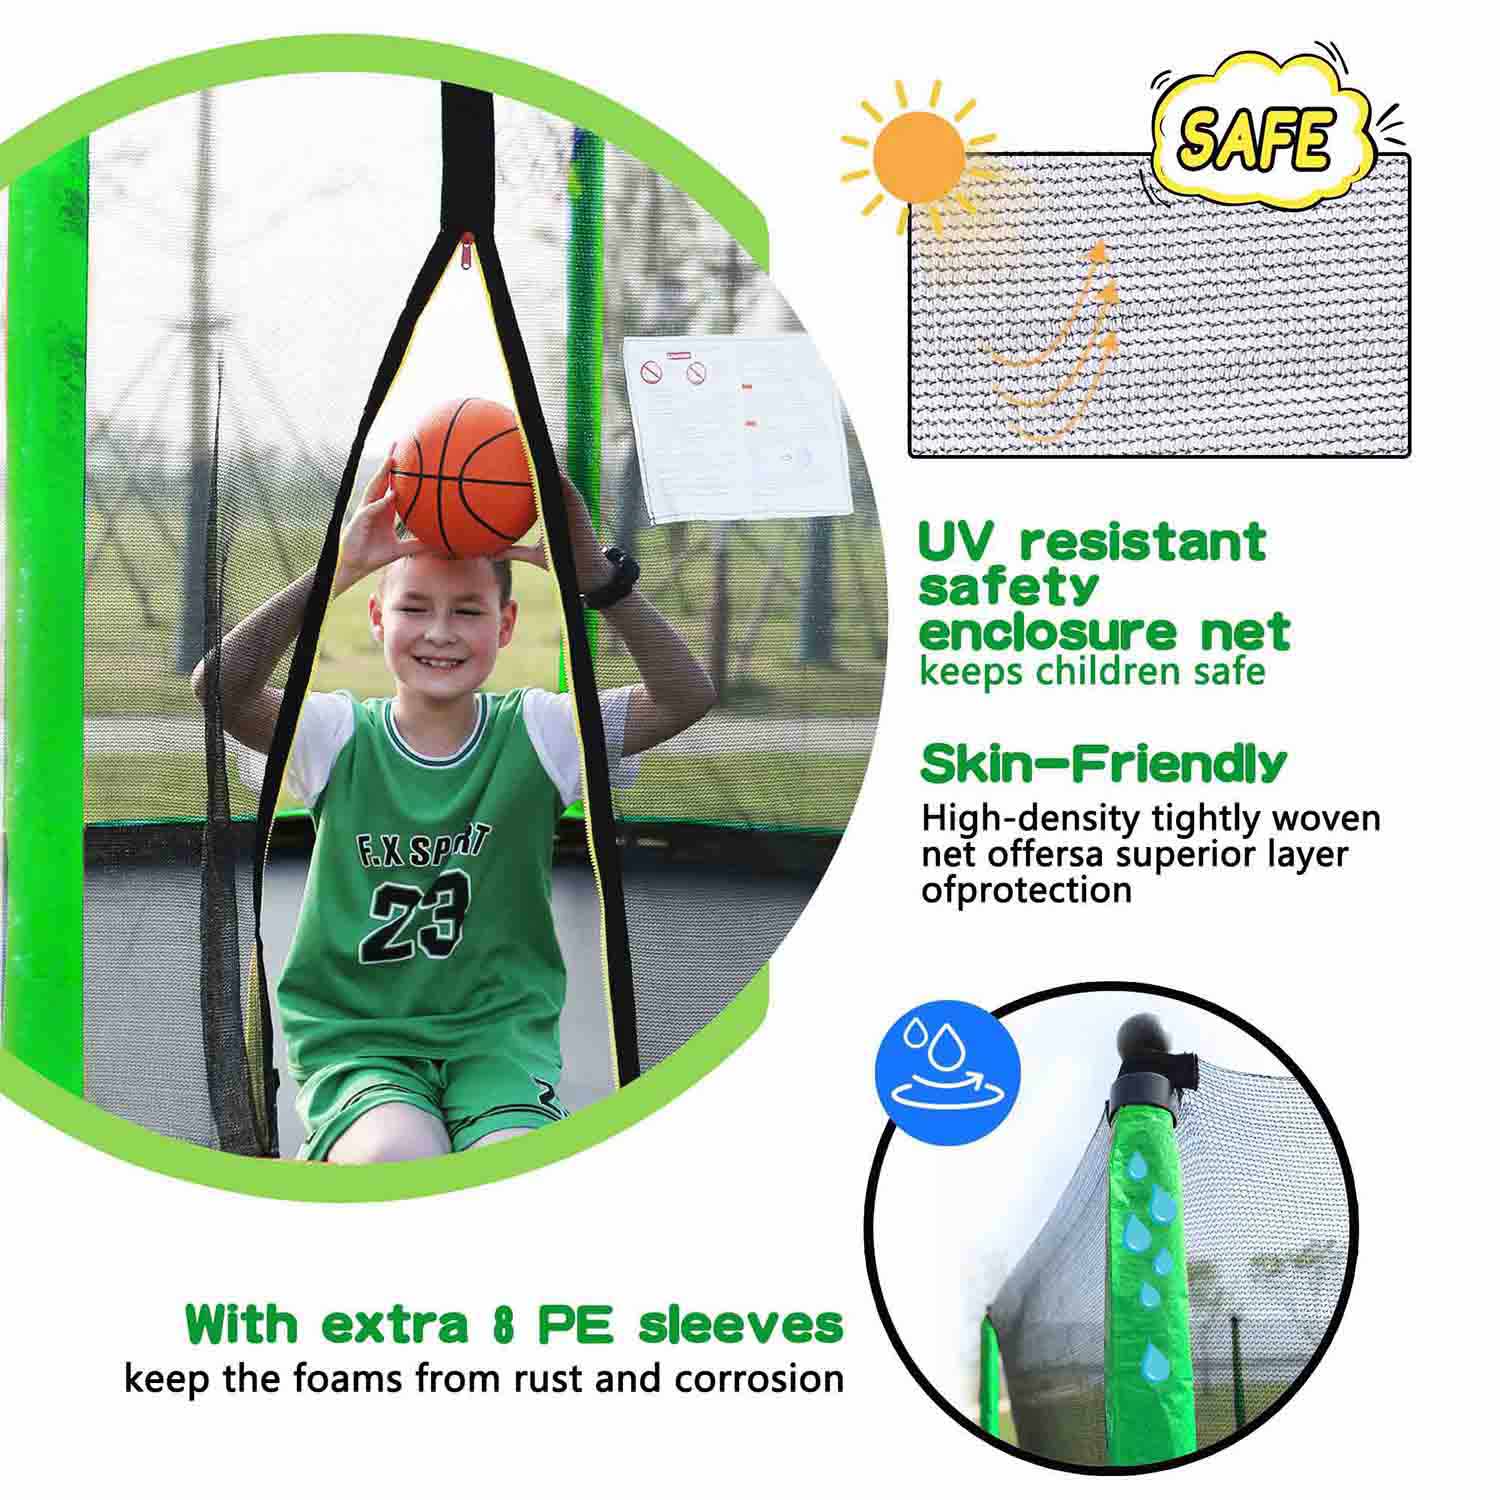 A boy is sitting on the green 10ft trampoline and holding a basketball with the text next to it saying: UV resistant safety enclosure net keeps children safe, skin-friendly, with extra 8 pe sleeves